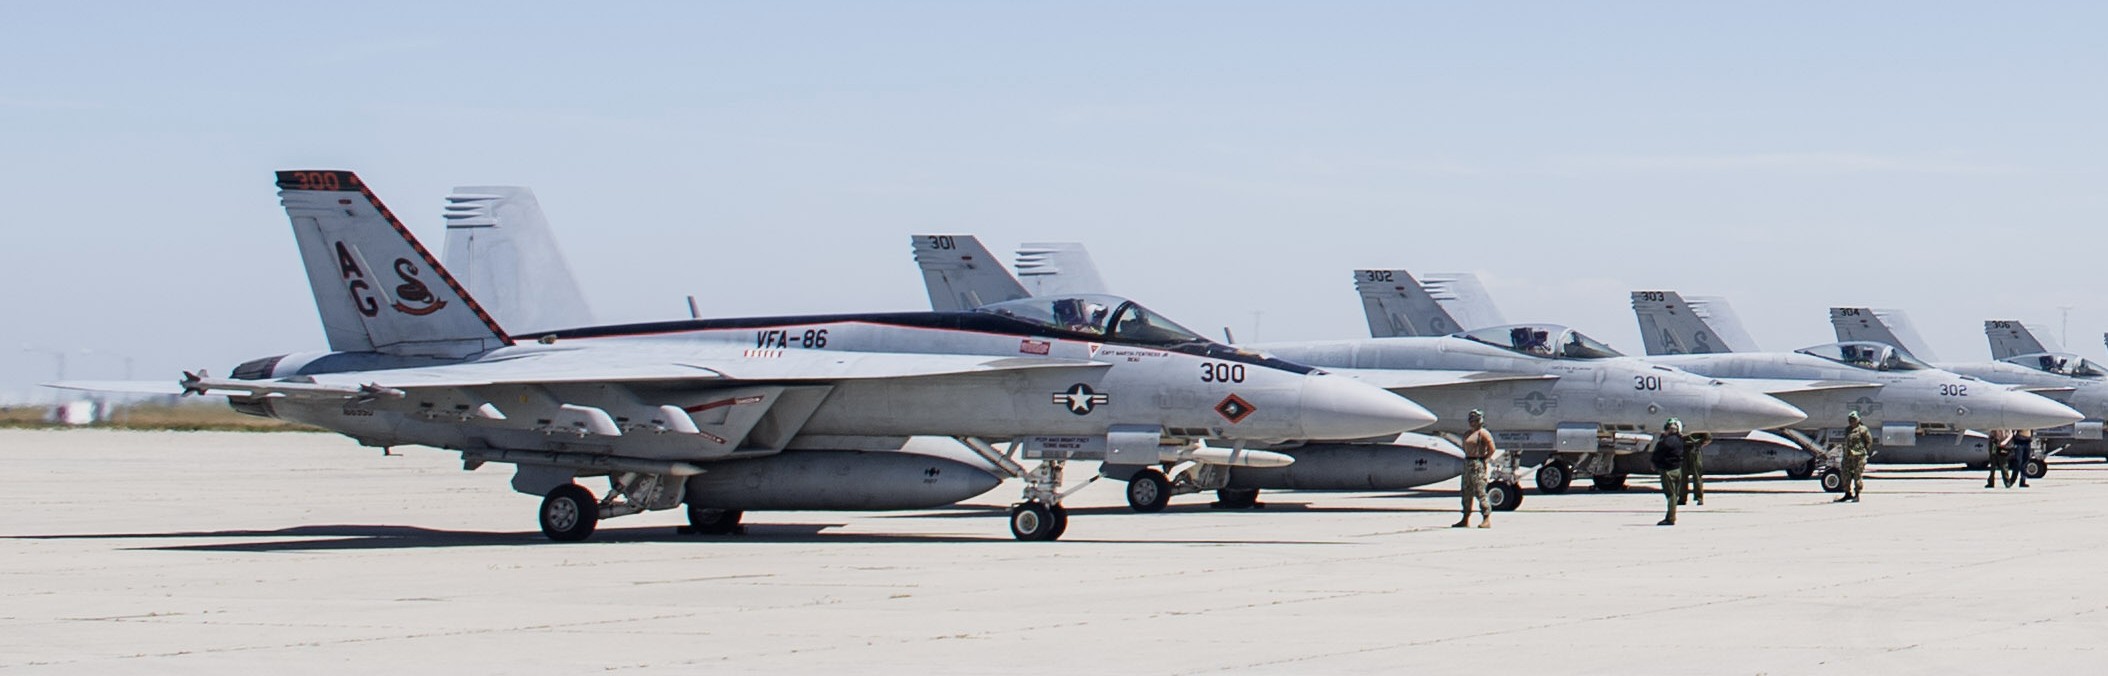 vfa-86 sidewinders strike fighter squadron f/a-18e super hornet us navy nas lemoore california 85